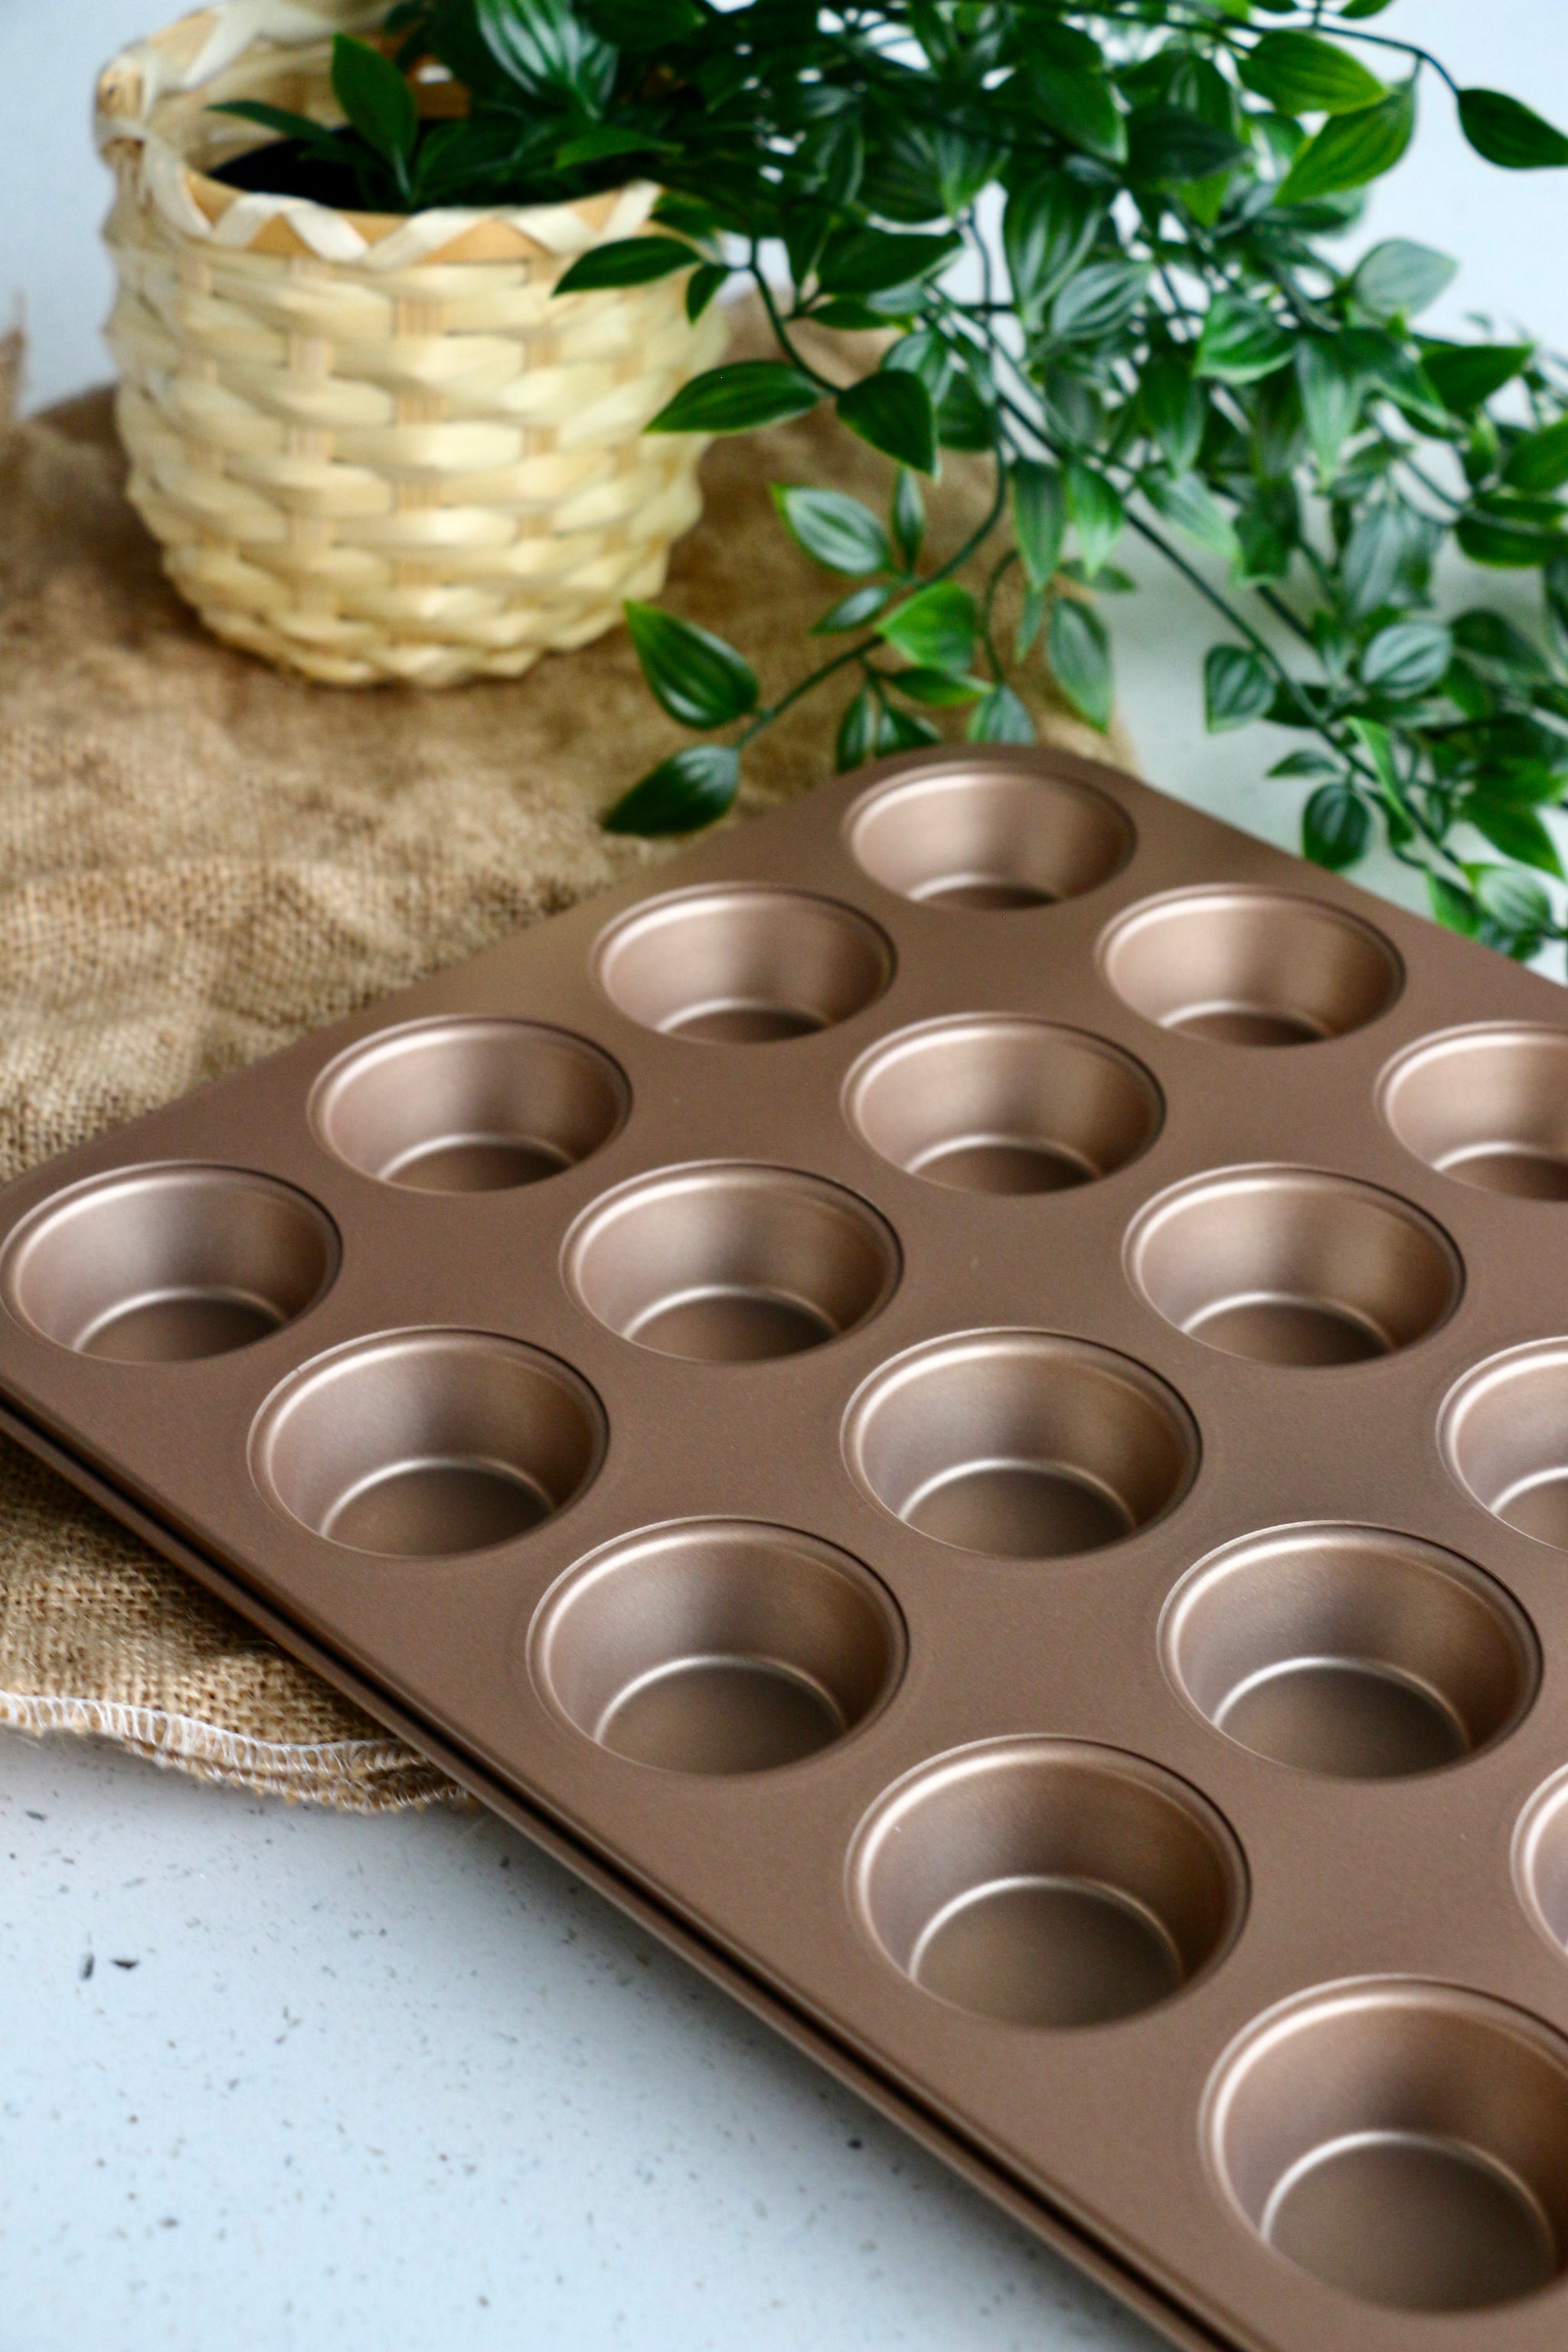 Cupcake and Muffin Pan - (24) 3-13/16 oz. Cup Capacity, Standard size